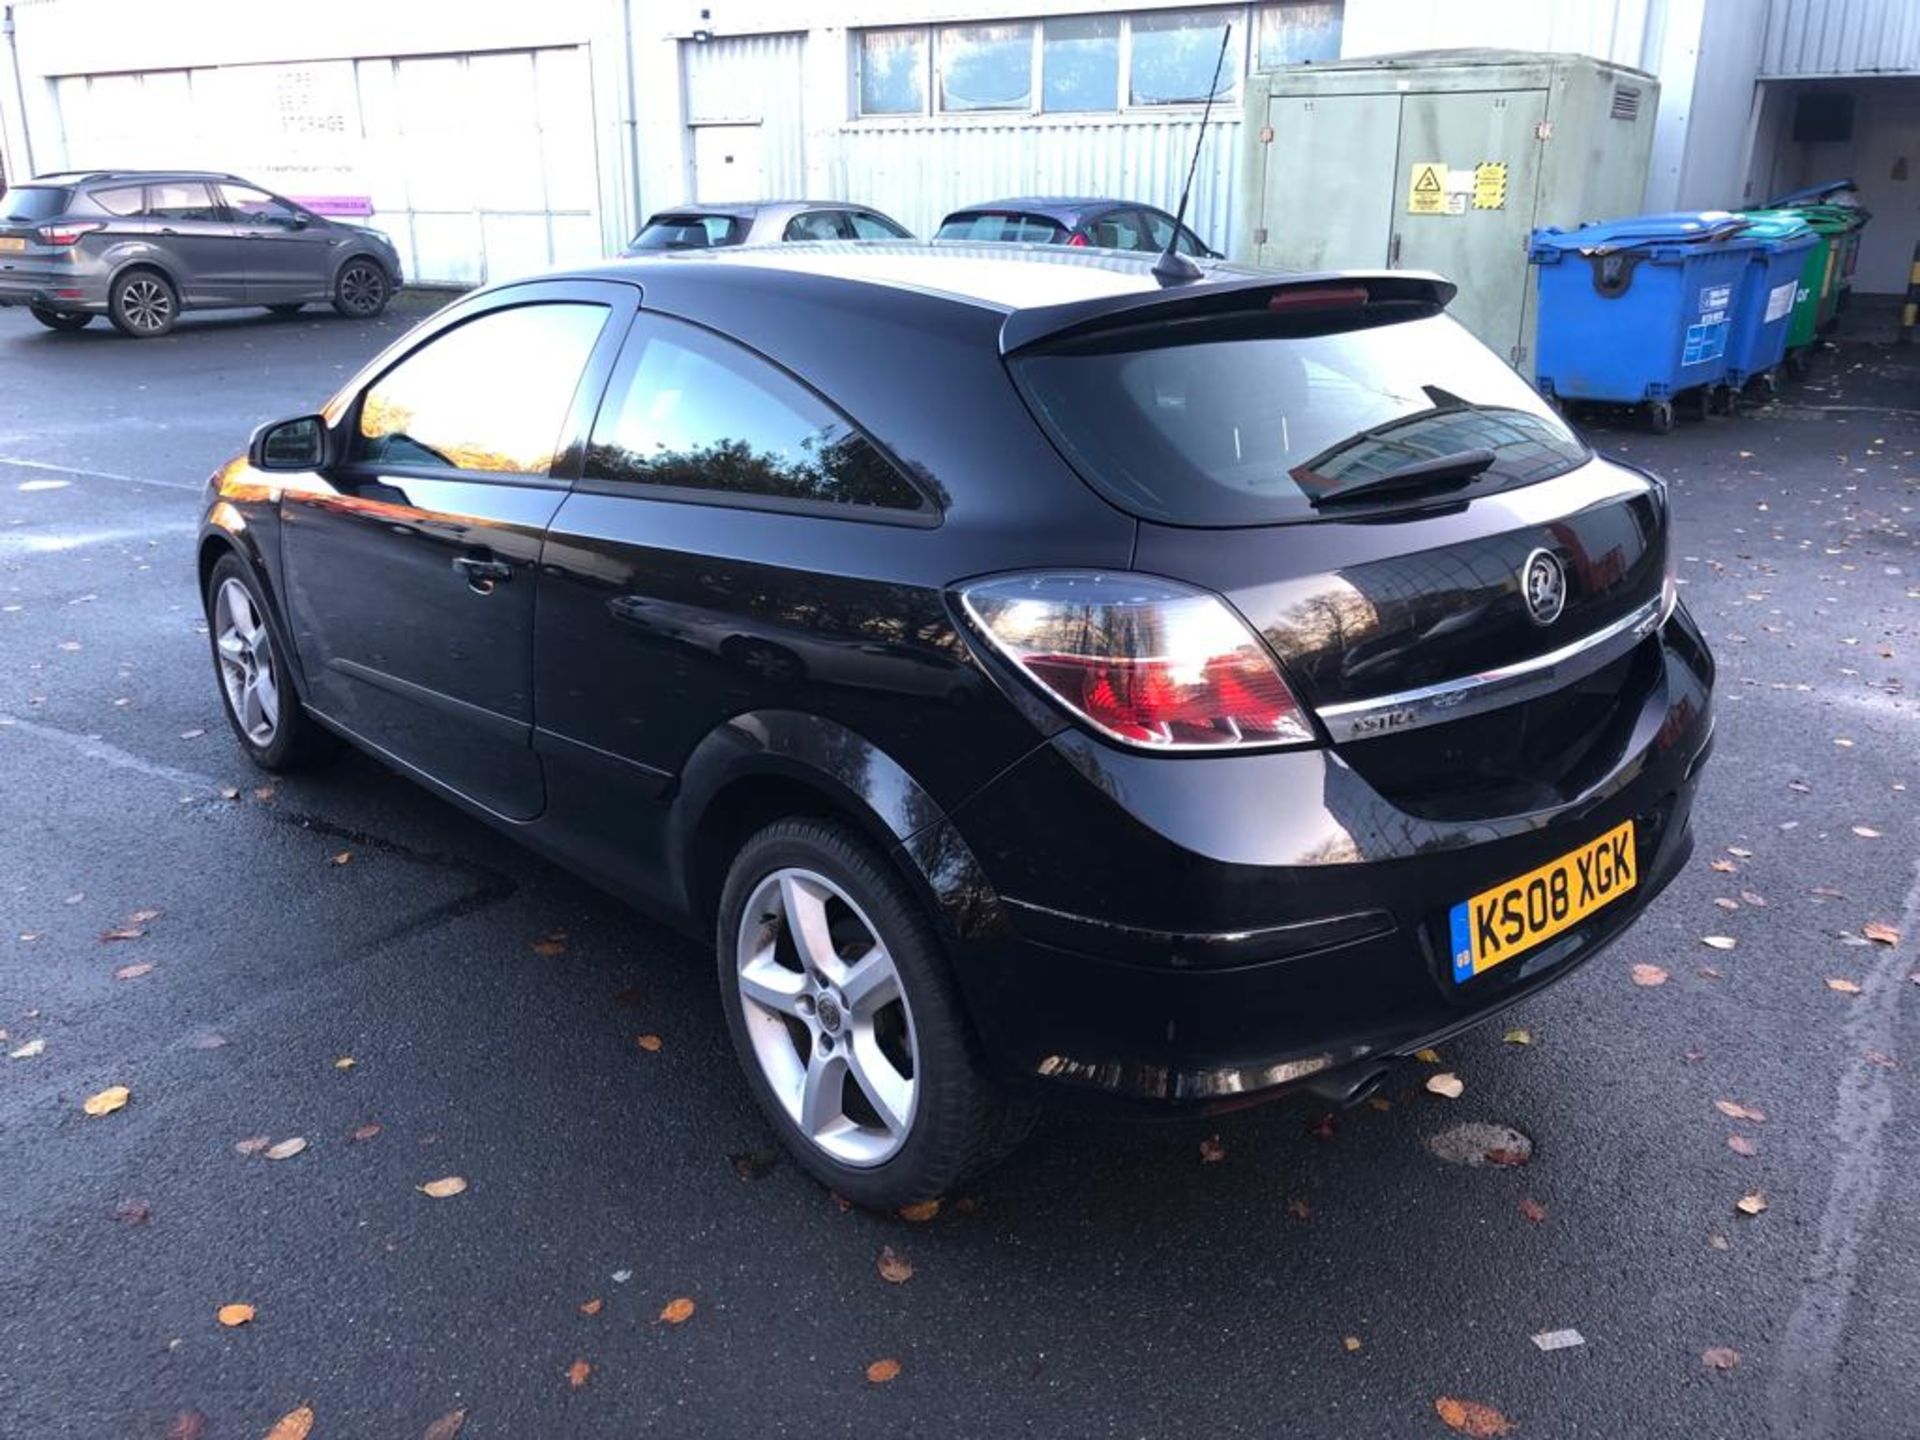 2008 Vauxhall Astra CDTI 3 Door Hatchback - 138,835 miles **RESERVE JUST REDUCED** - Image 5 of 15